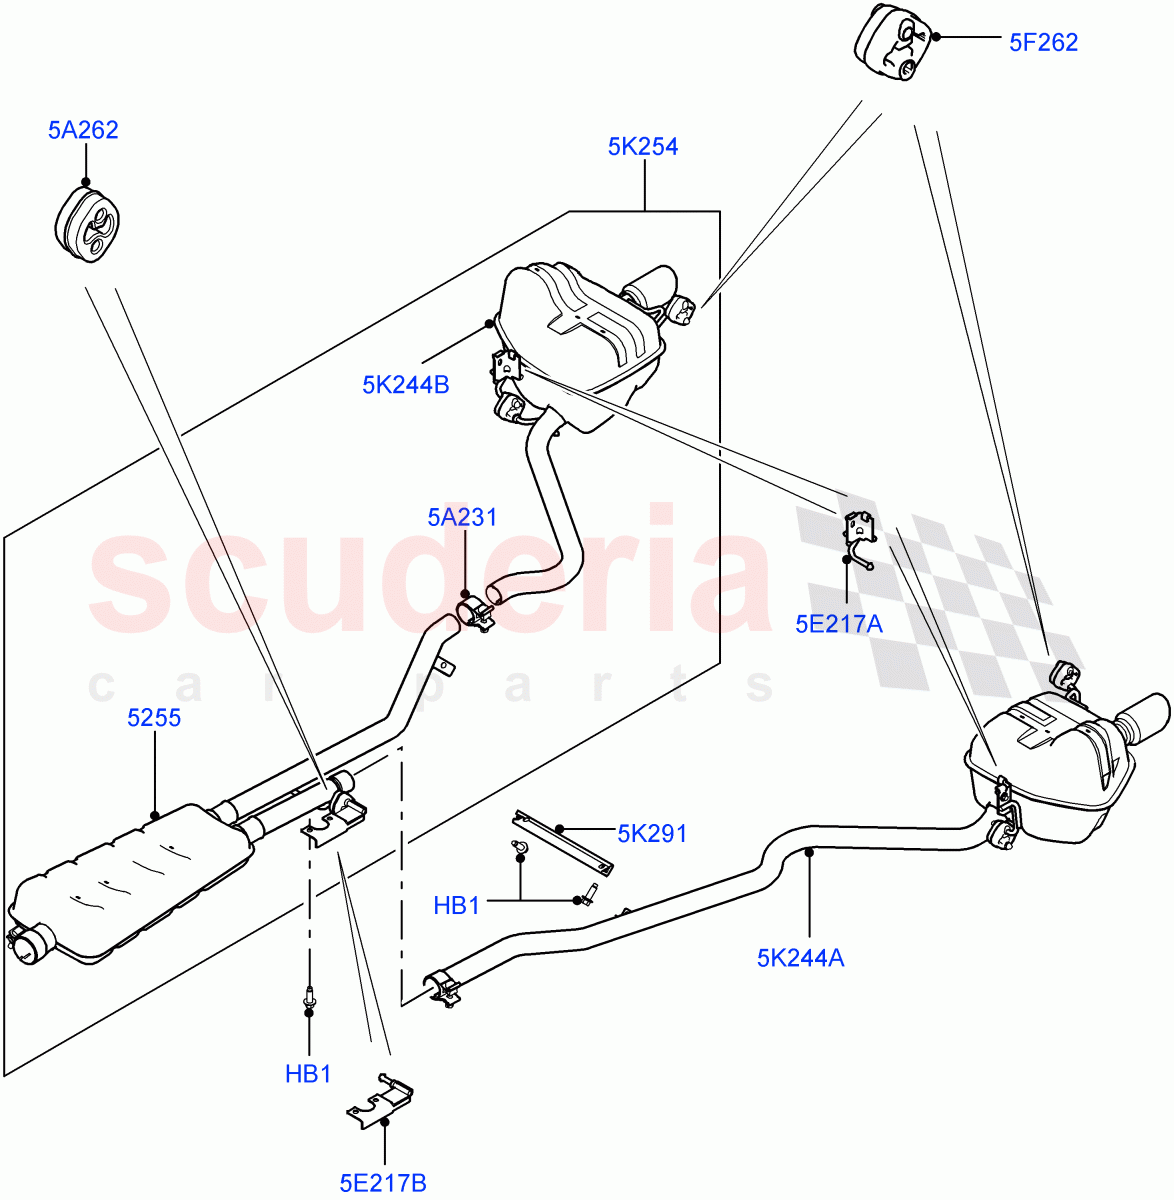 Exhaust System(Rear Section)(2.0L 16V TIVCT T/C Gen2 Petrol,Halewood (UK),With Tool Kit,With 7 Seat Configuration,Spare Wheel - Reduced Section Steel,2.0L 16V TIVCT T/C 240PS Petrol) of Land Rover Land Rover Discovery Sport (2015+) [2.0 Turbo Petrol GTDI]